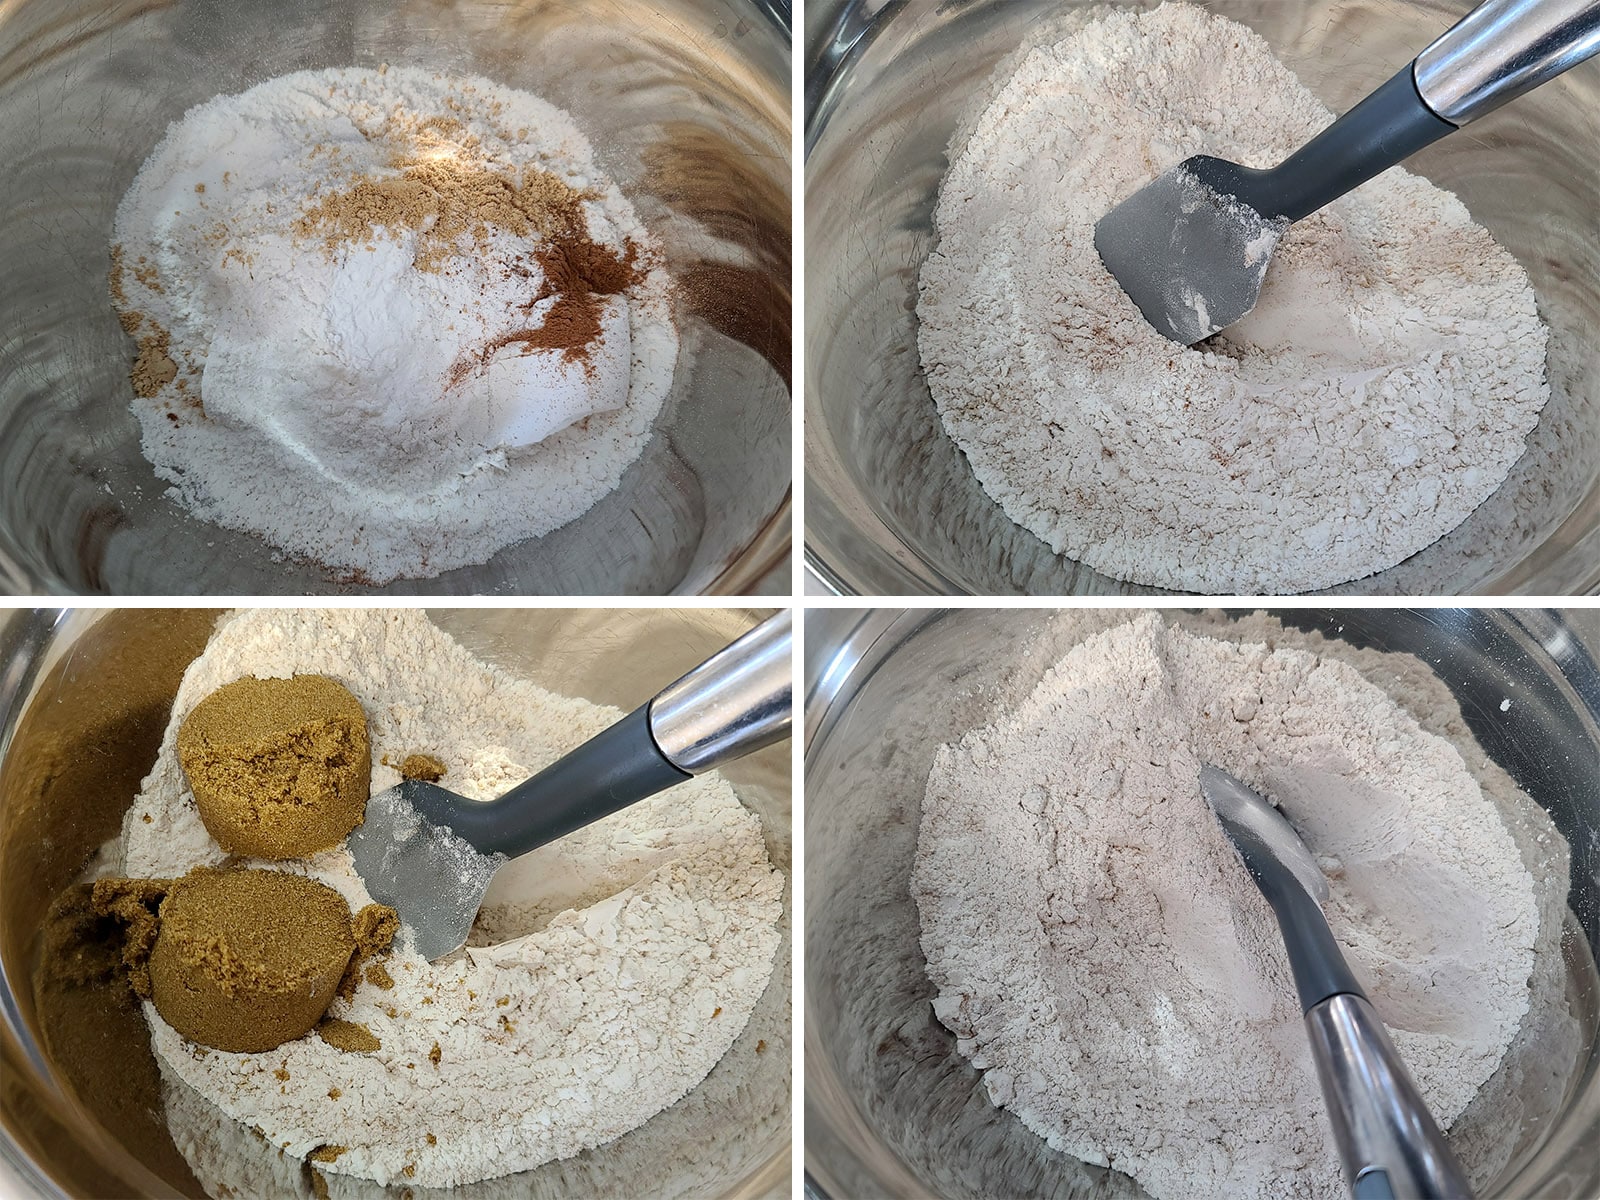 A 4 part image showing the dry ingredients being mixed together.